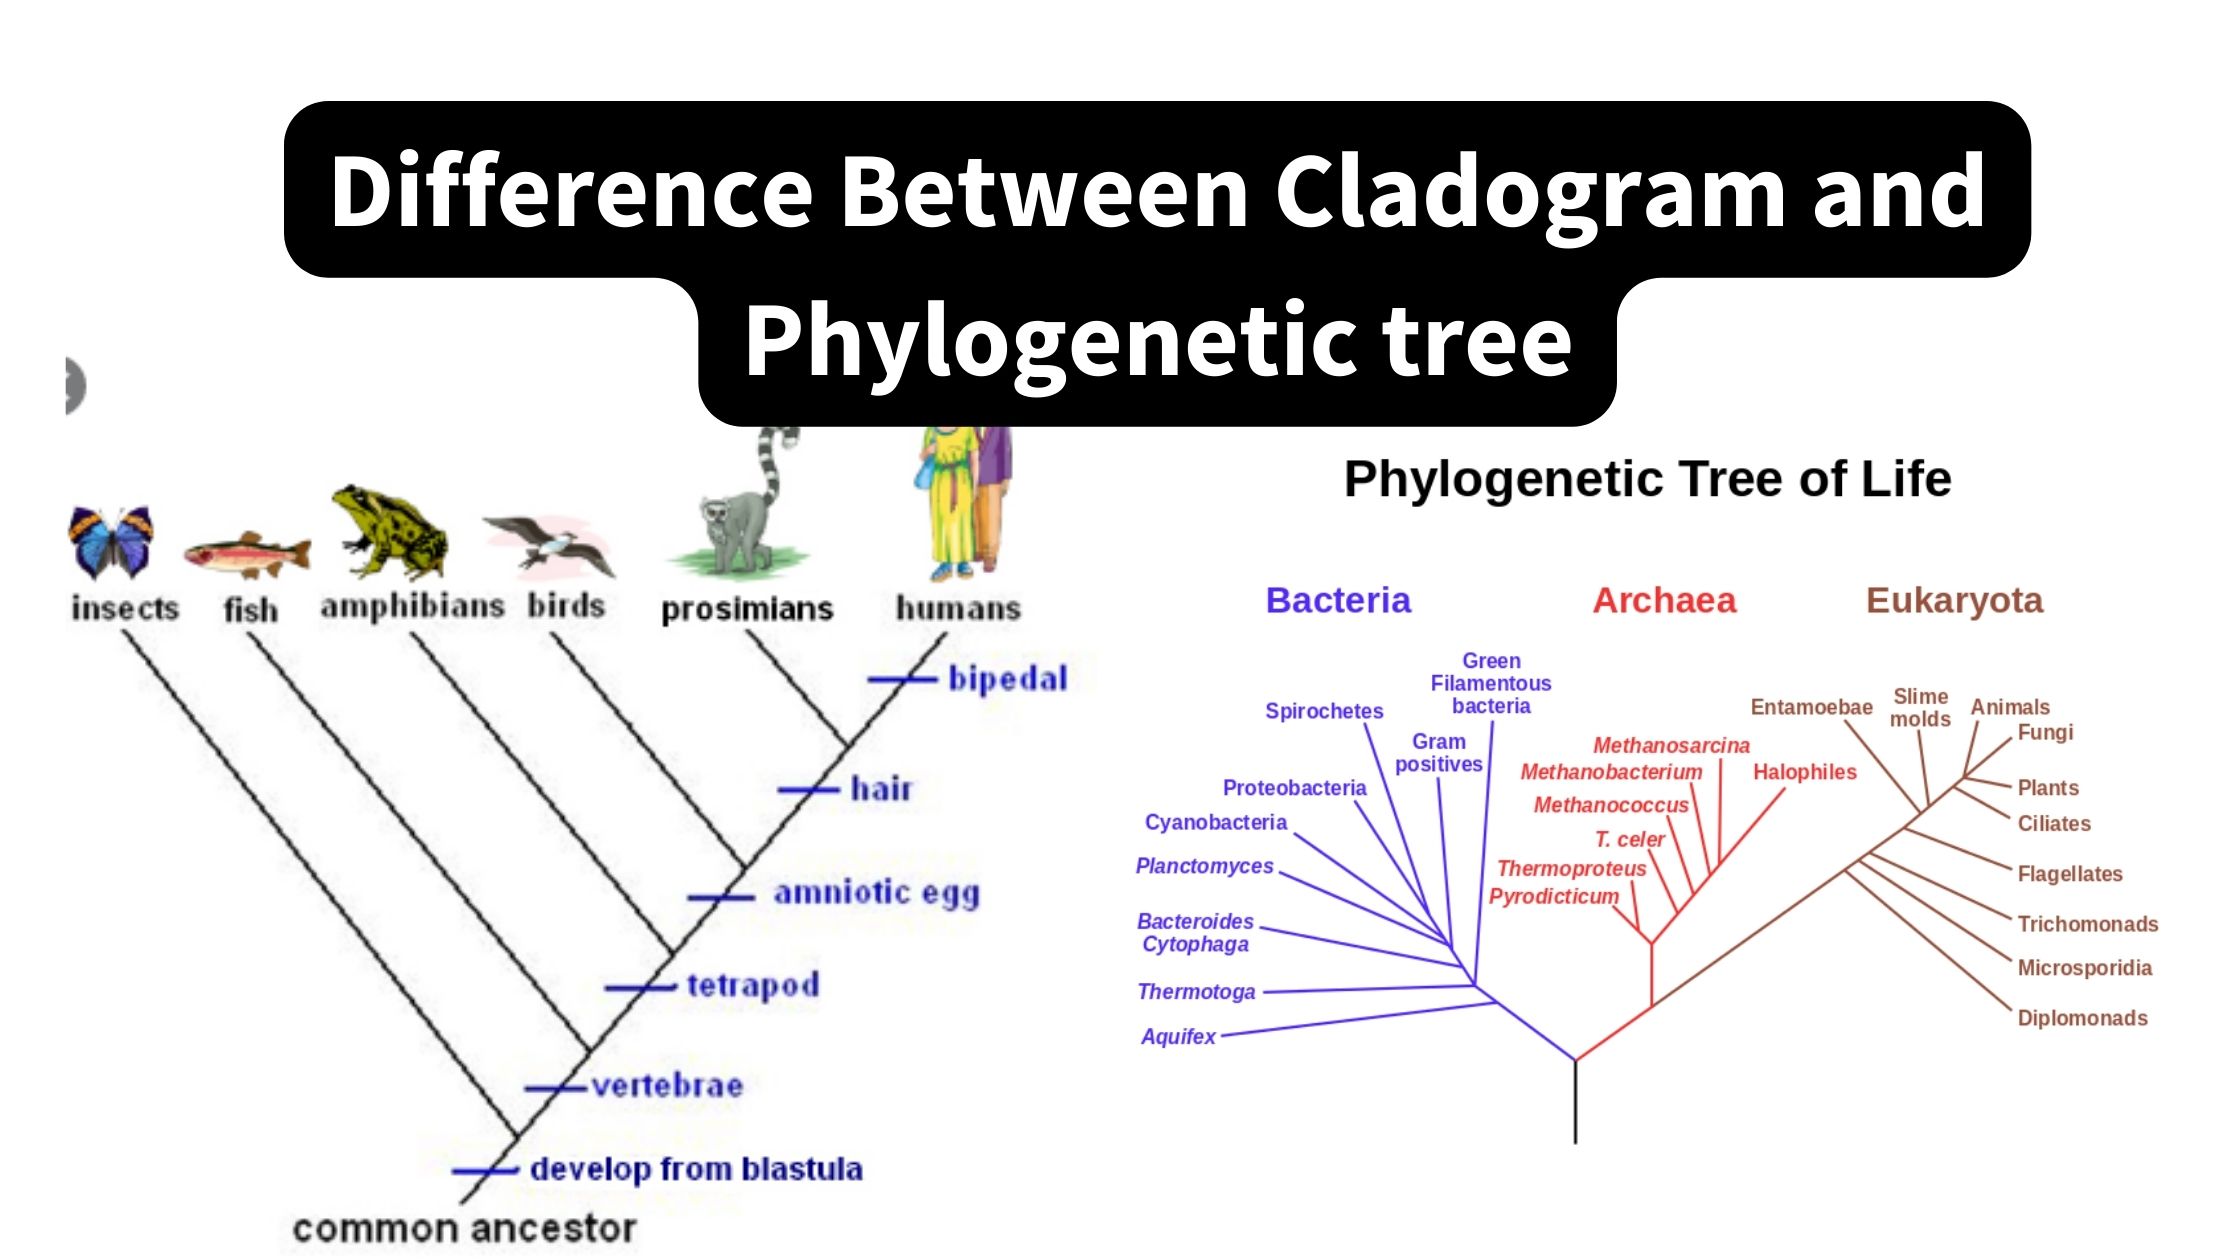 Difference Between Cladogram and Phylogenetic tree